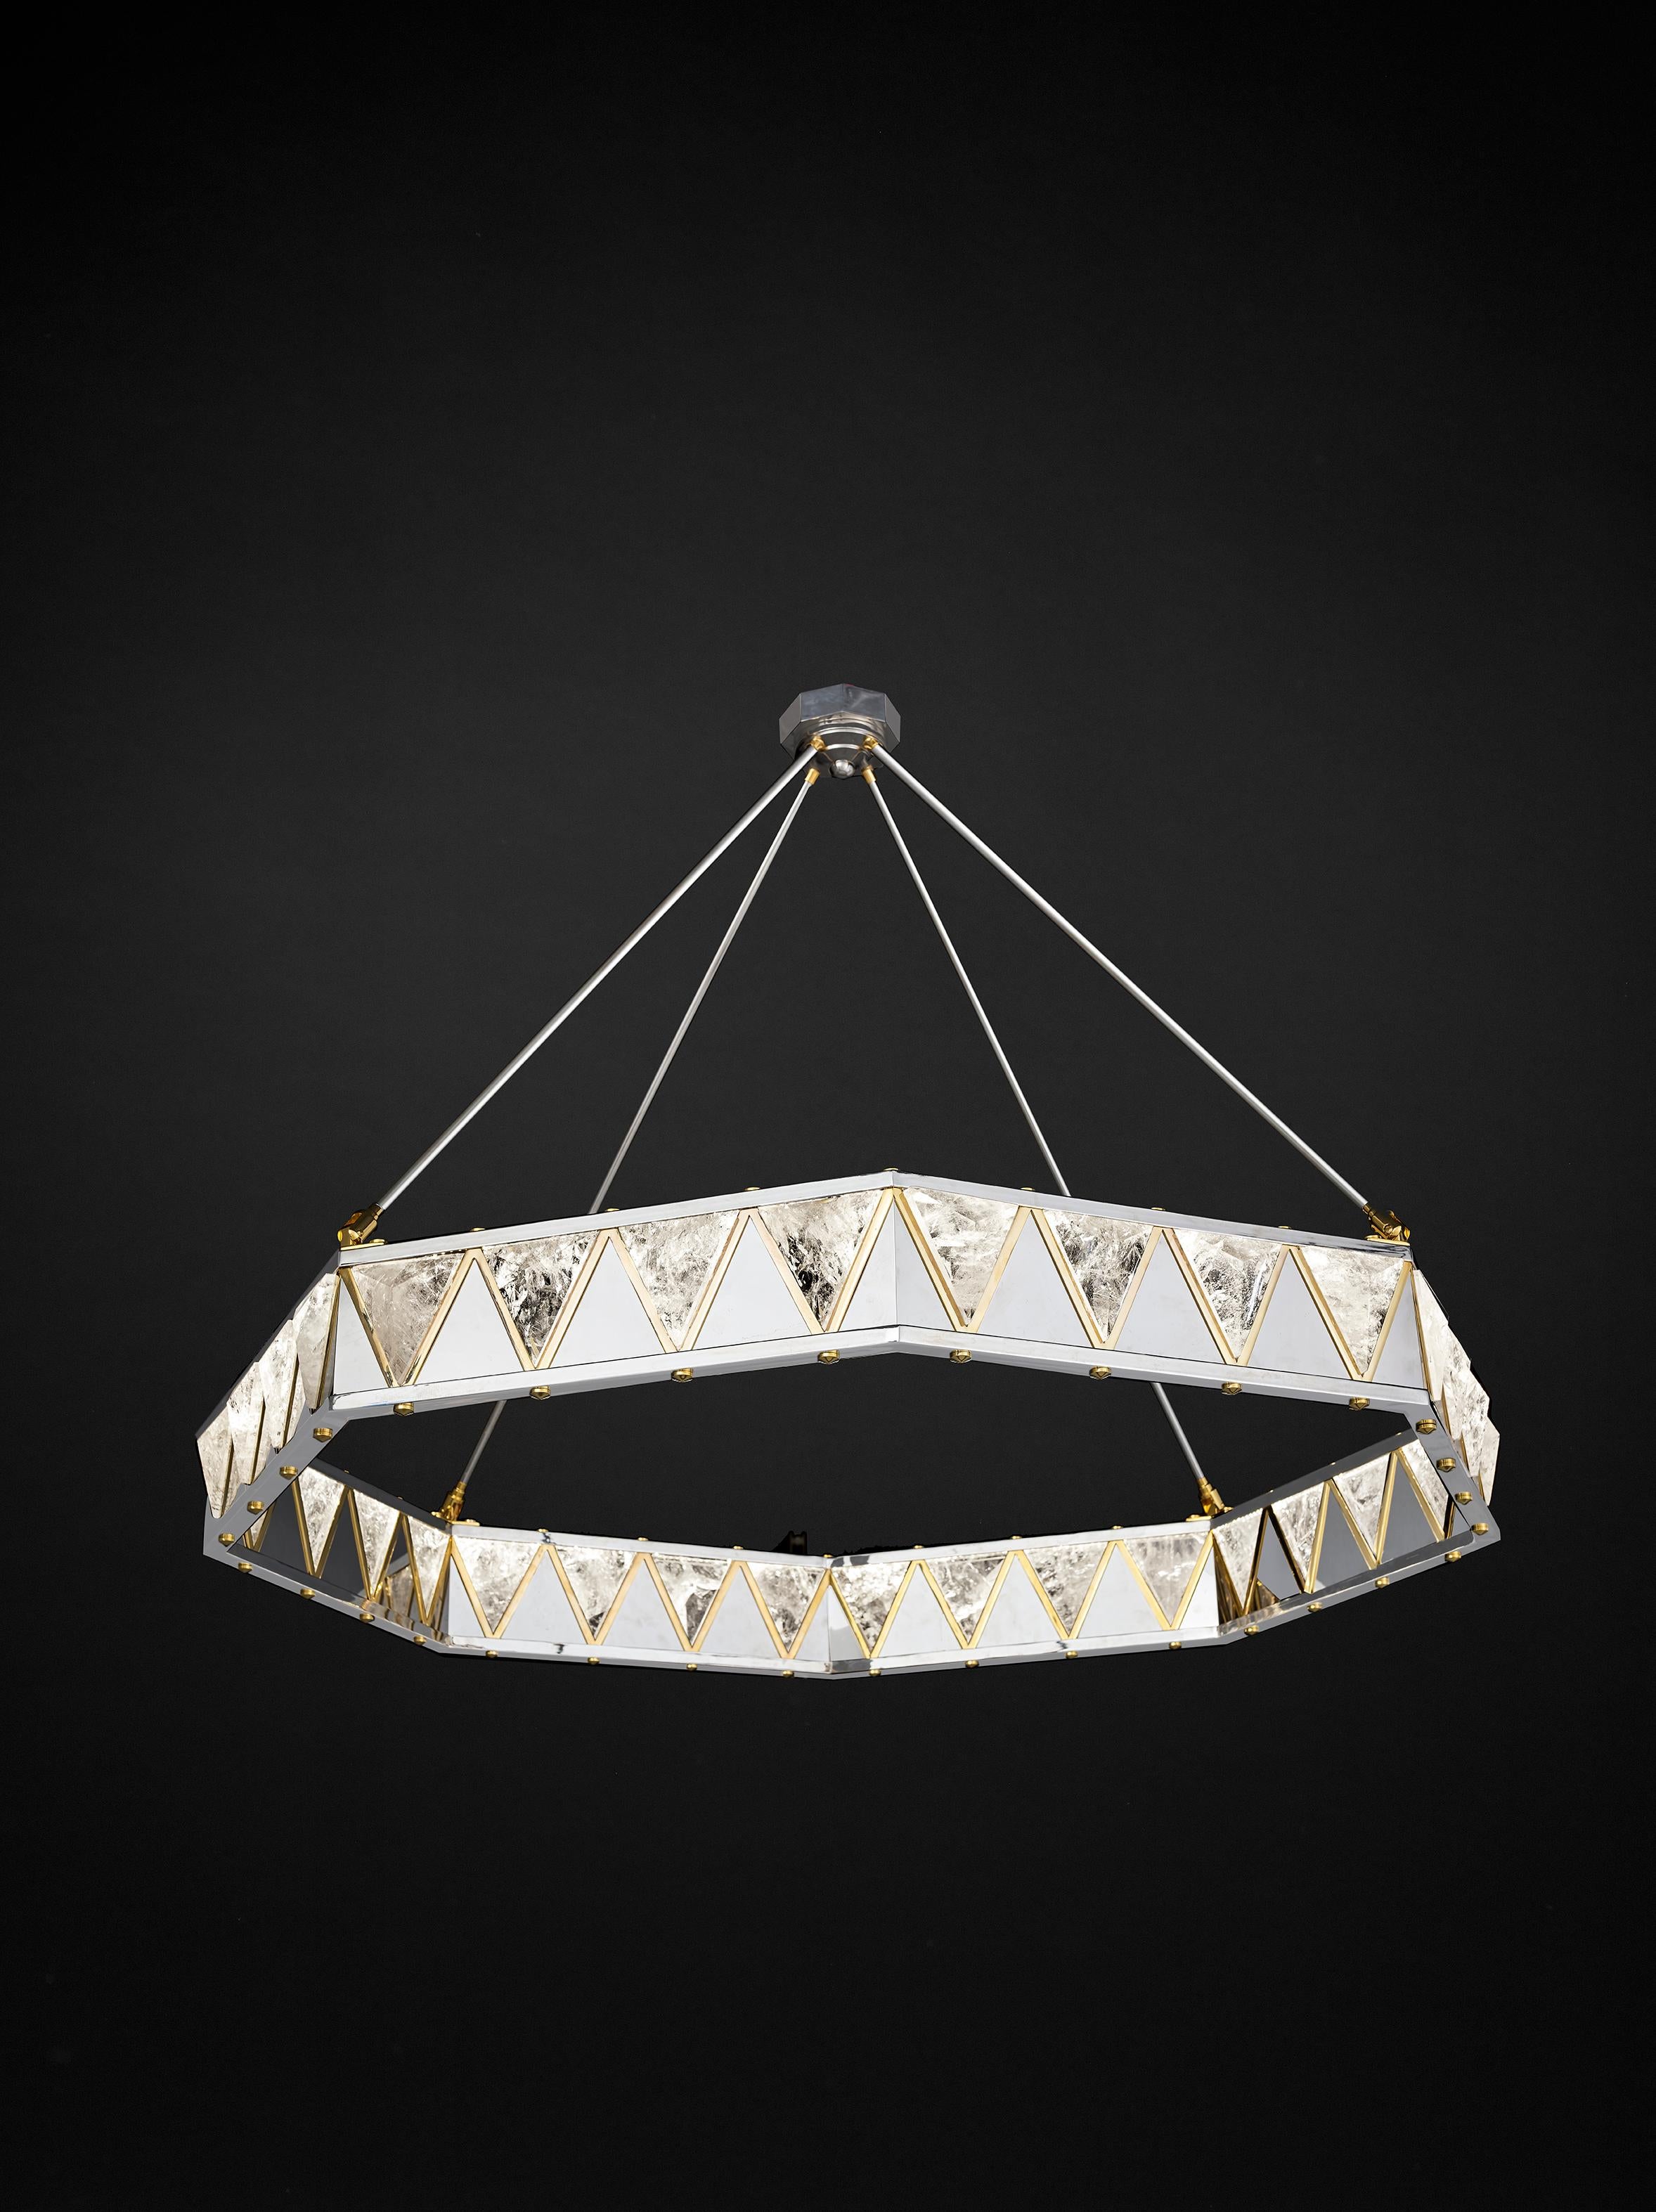 Rock crystal and 24 K gold-plated and nickel brass chandelier.
handmade in Paris.
 